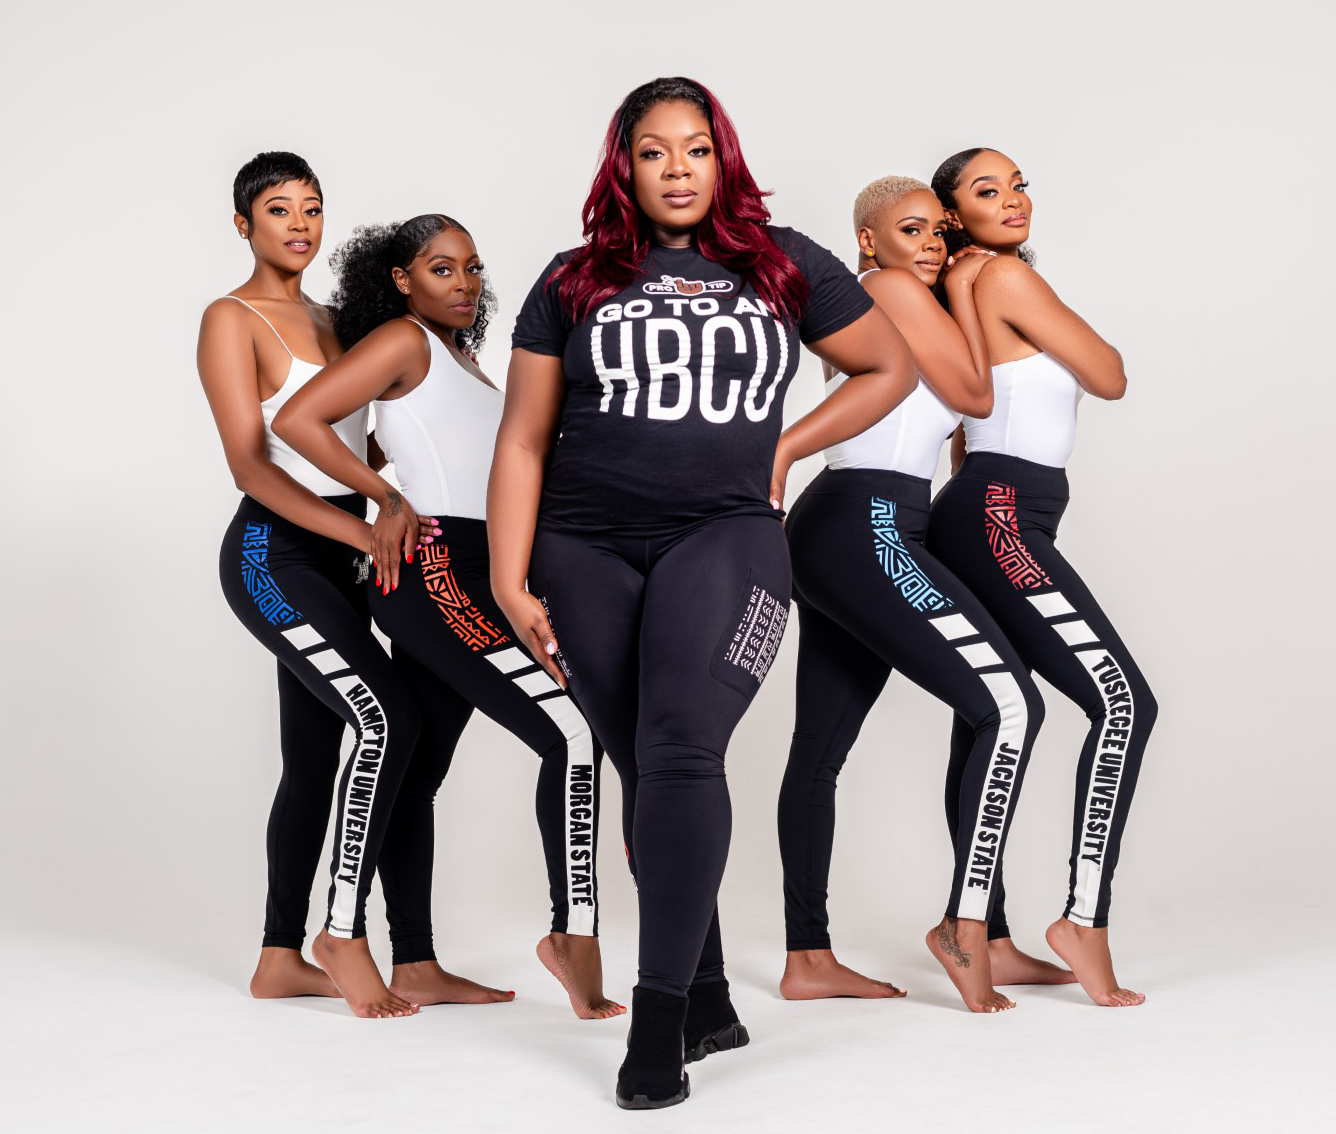 HBCU Leggings’ Founder, Amina Hammond, Garners National Attention and Success